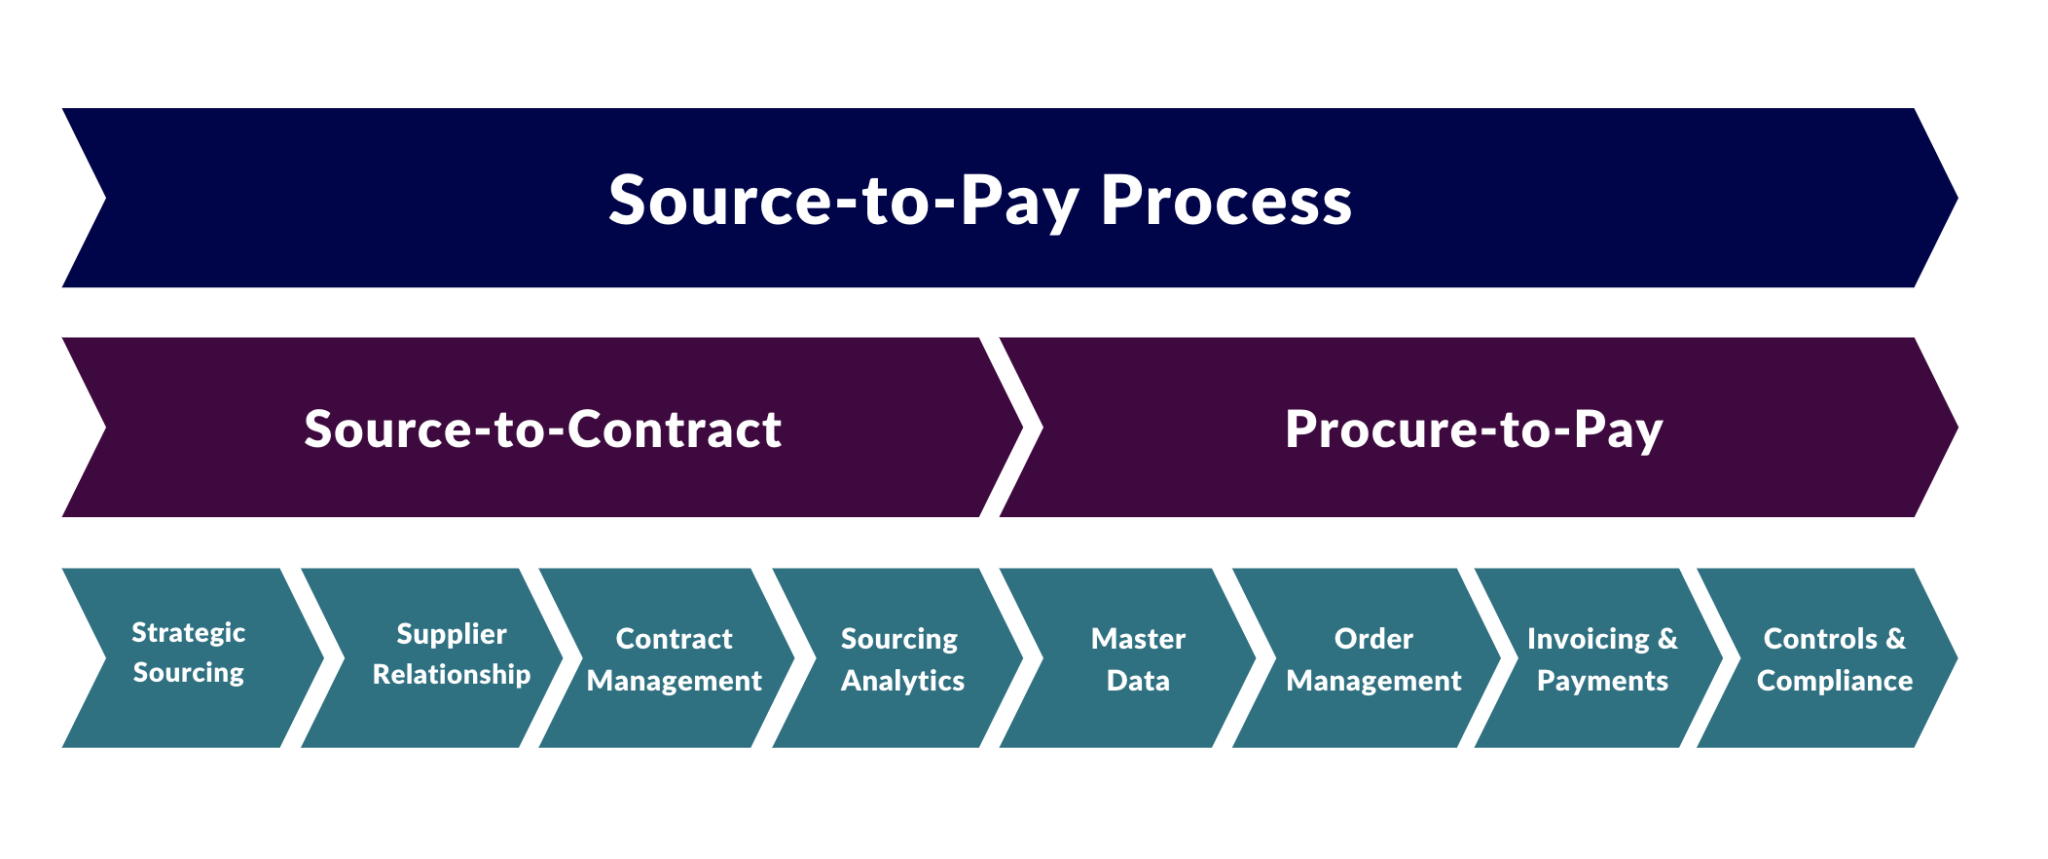 Also pay. Source to pay. Source-2-pay. P2p – procure-to-pay. Procurement to pay.